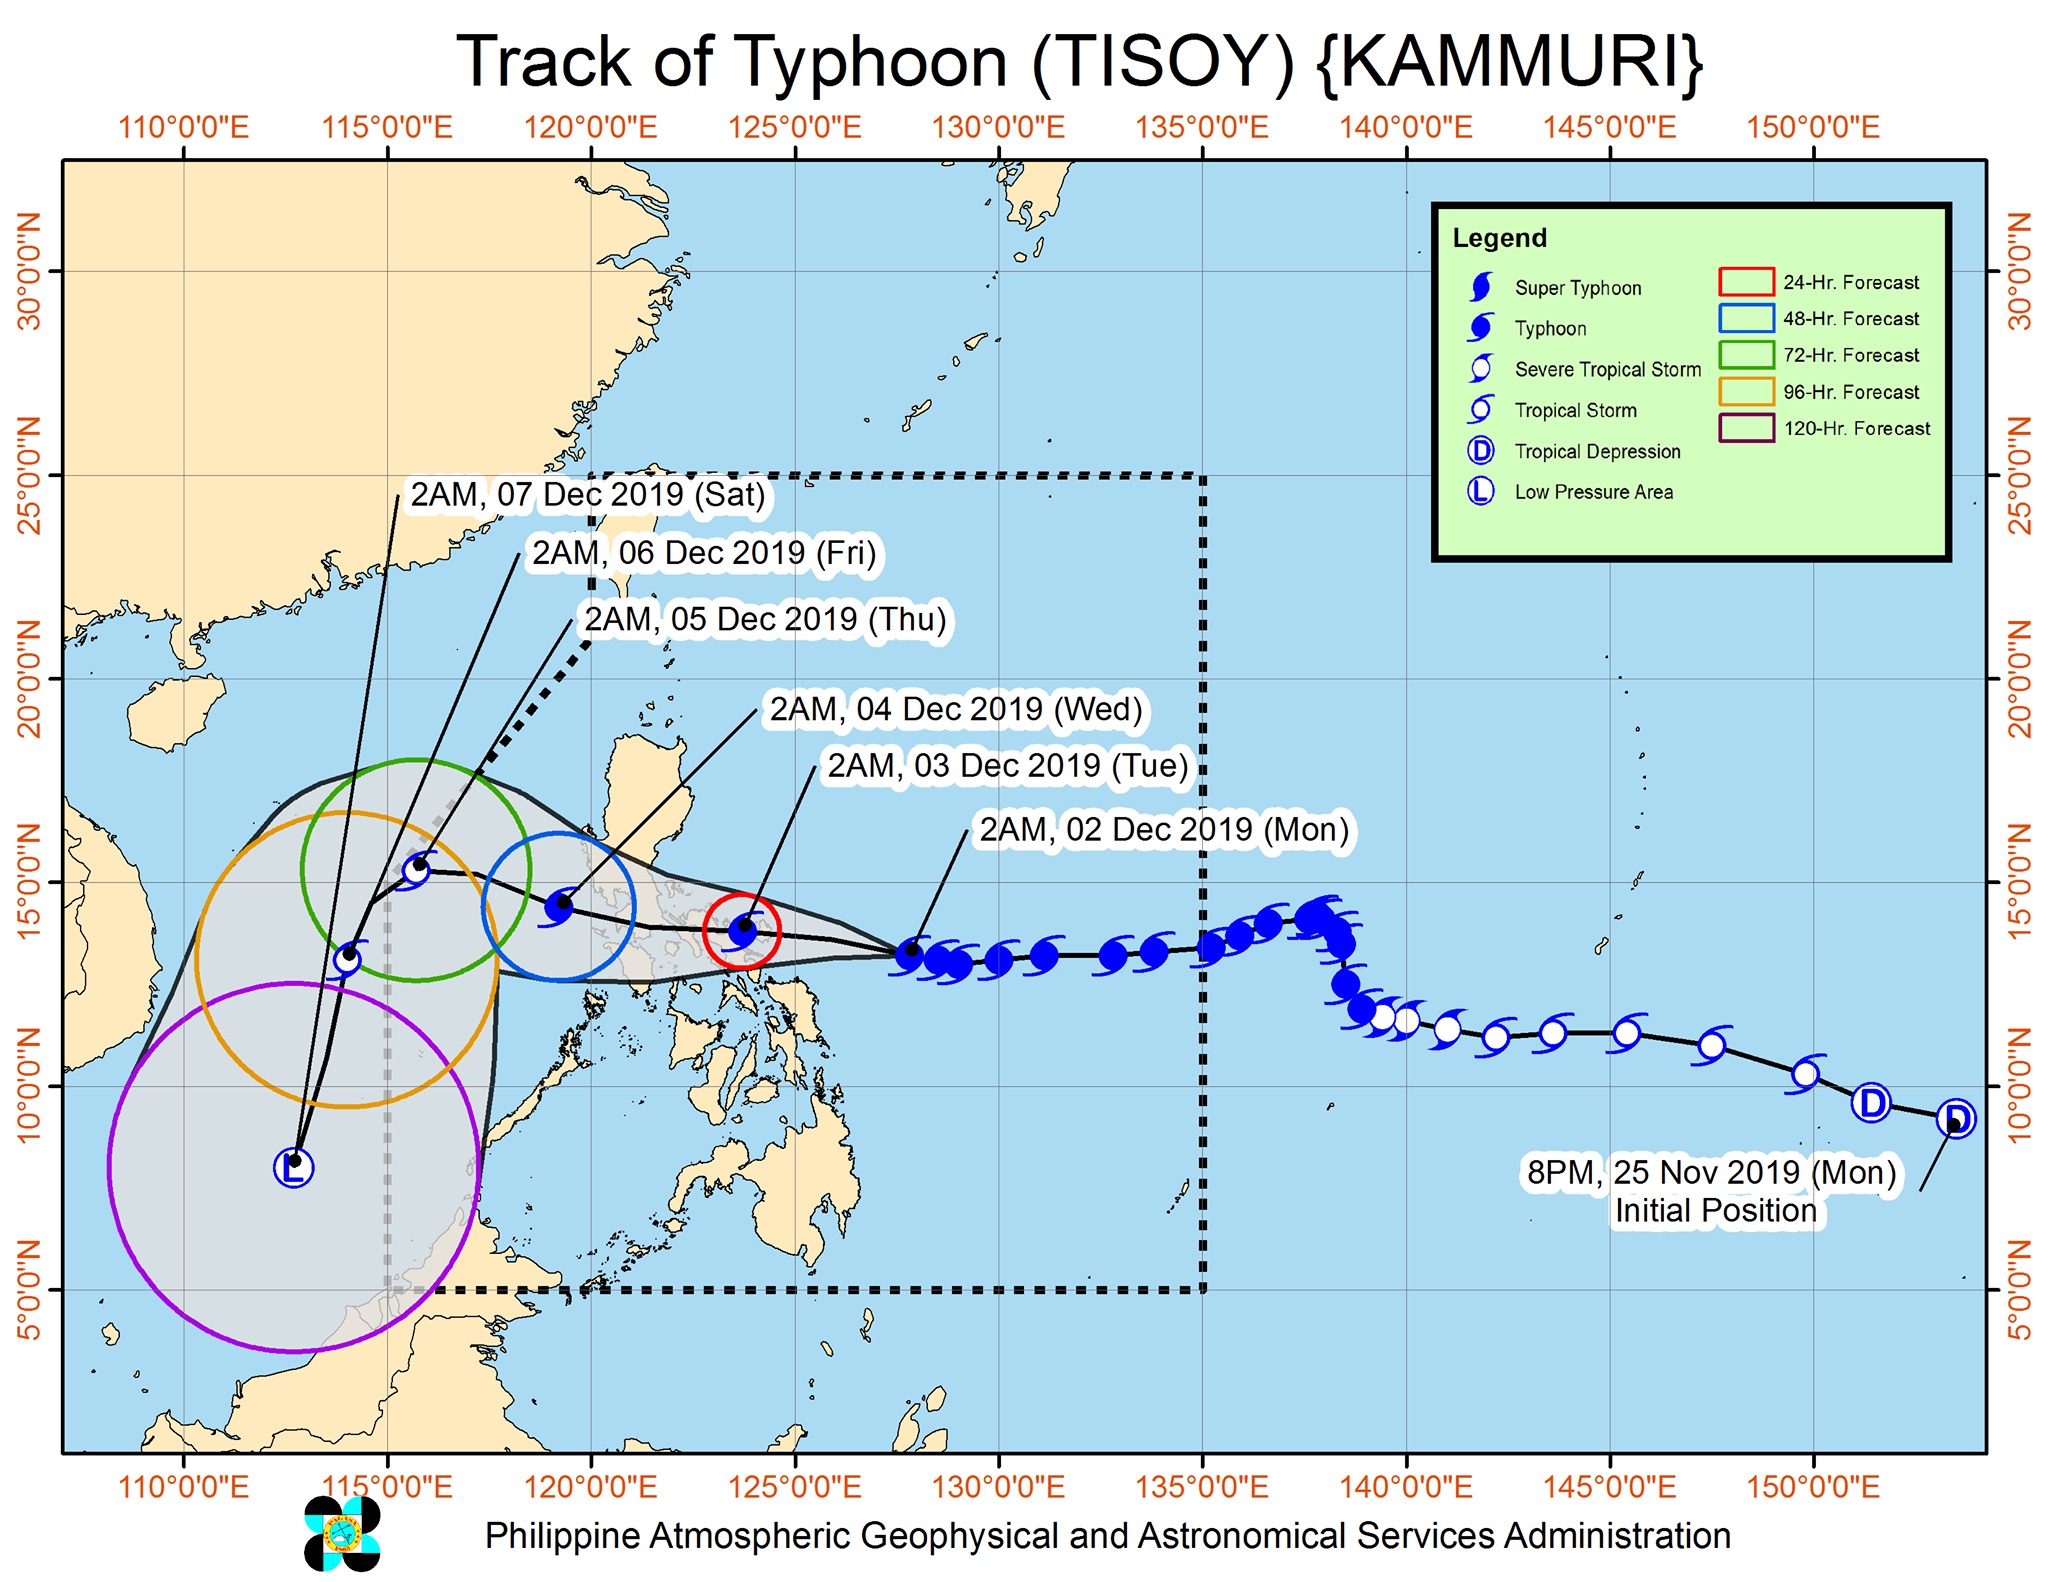 Forecast track of Typhoon Tisoy (Kammuri) as of December 2, 2019, 5 am. Image from PAGASA 